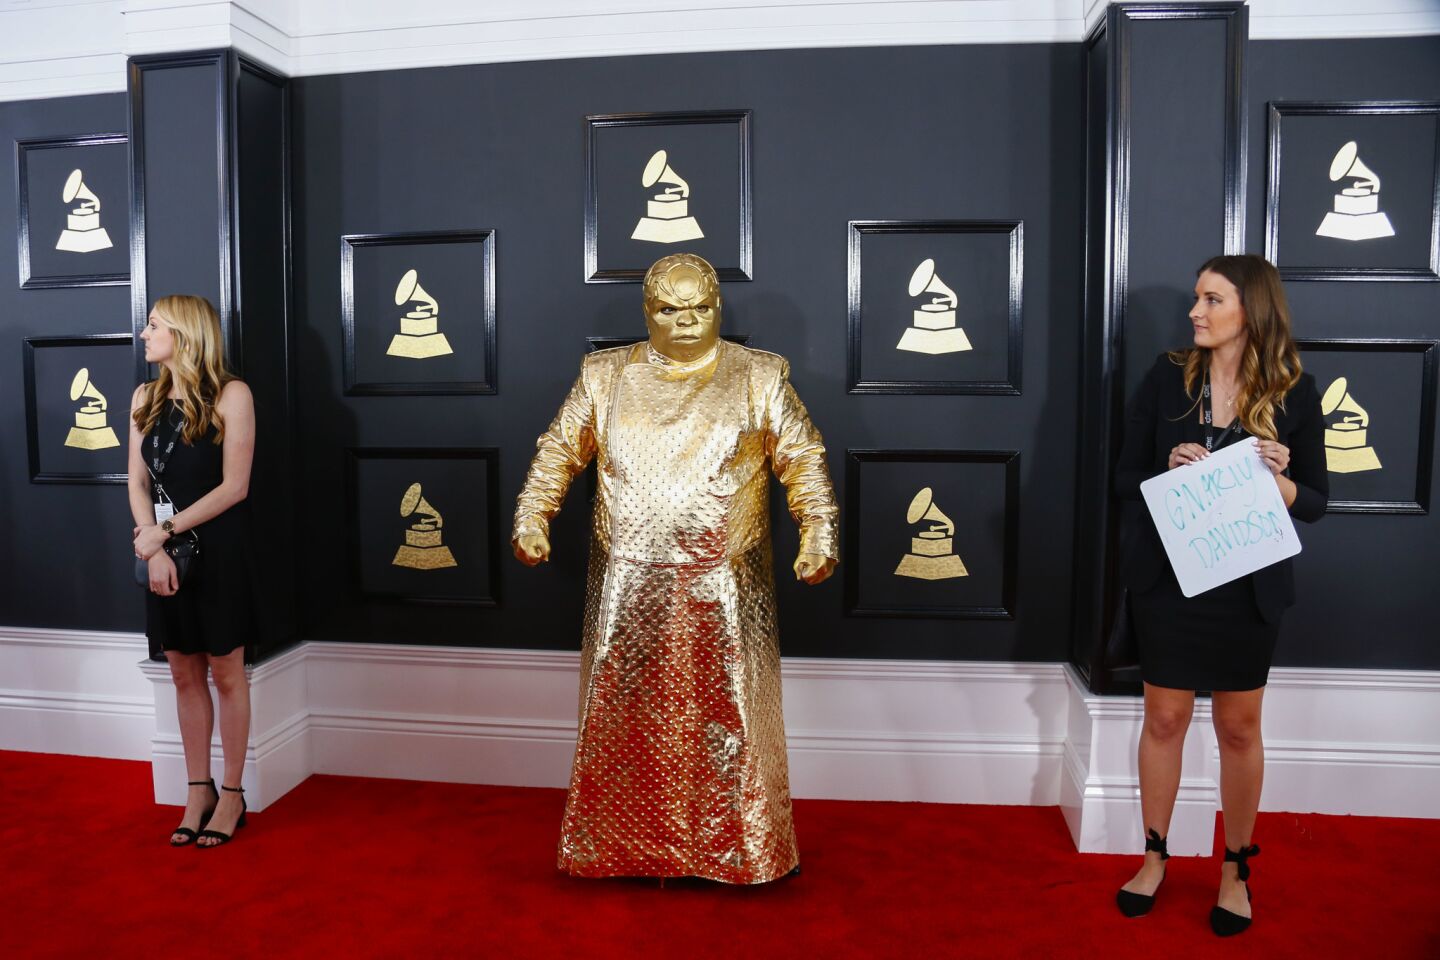 CeeLo Green alter ego Gnarly Davidsonn arrive at the 59th Annual Grammy Awards.